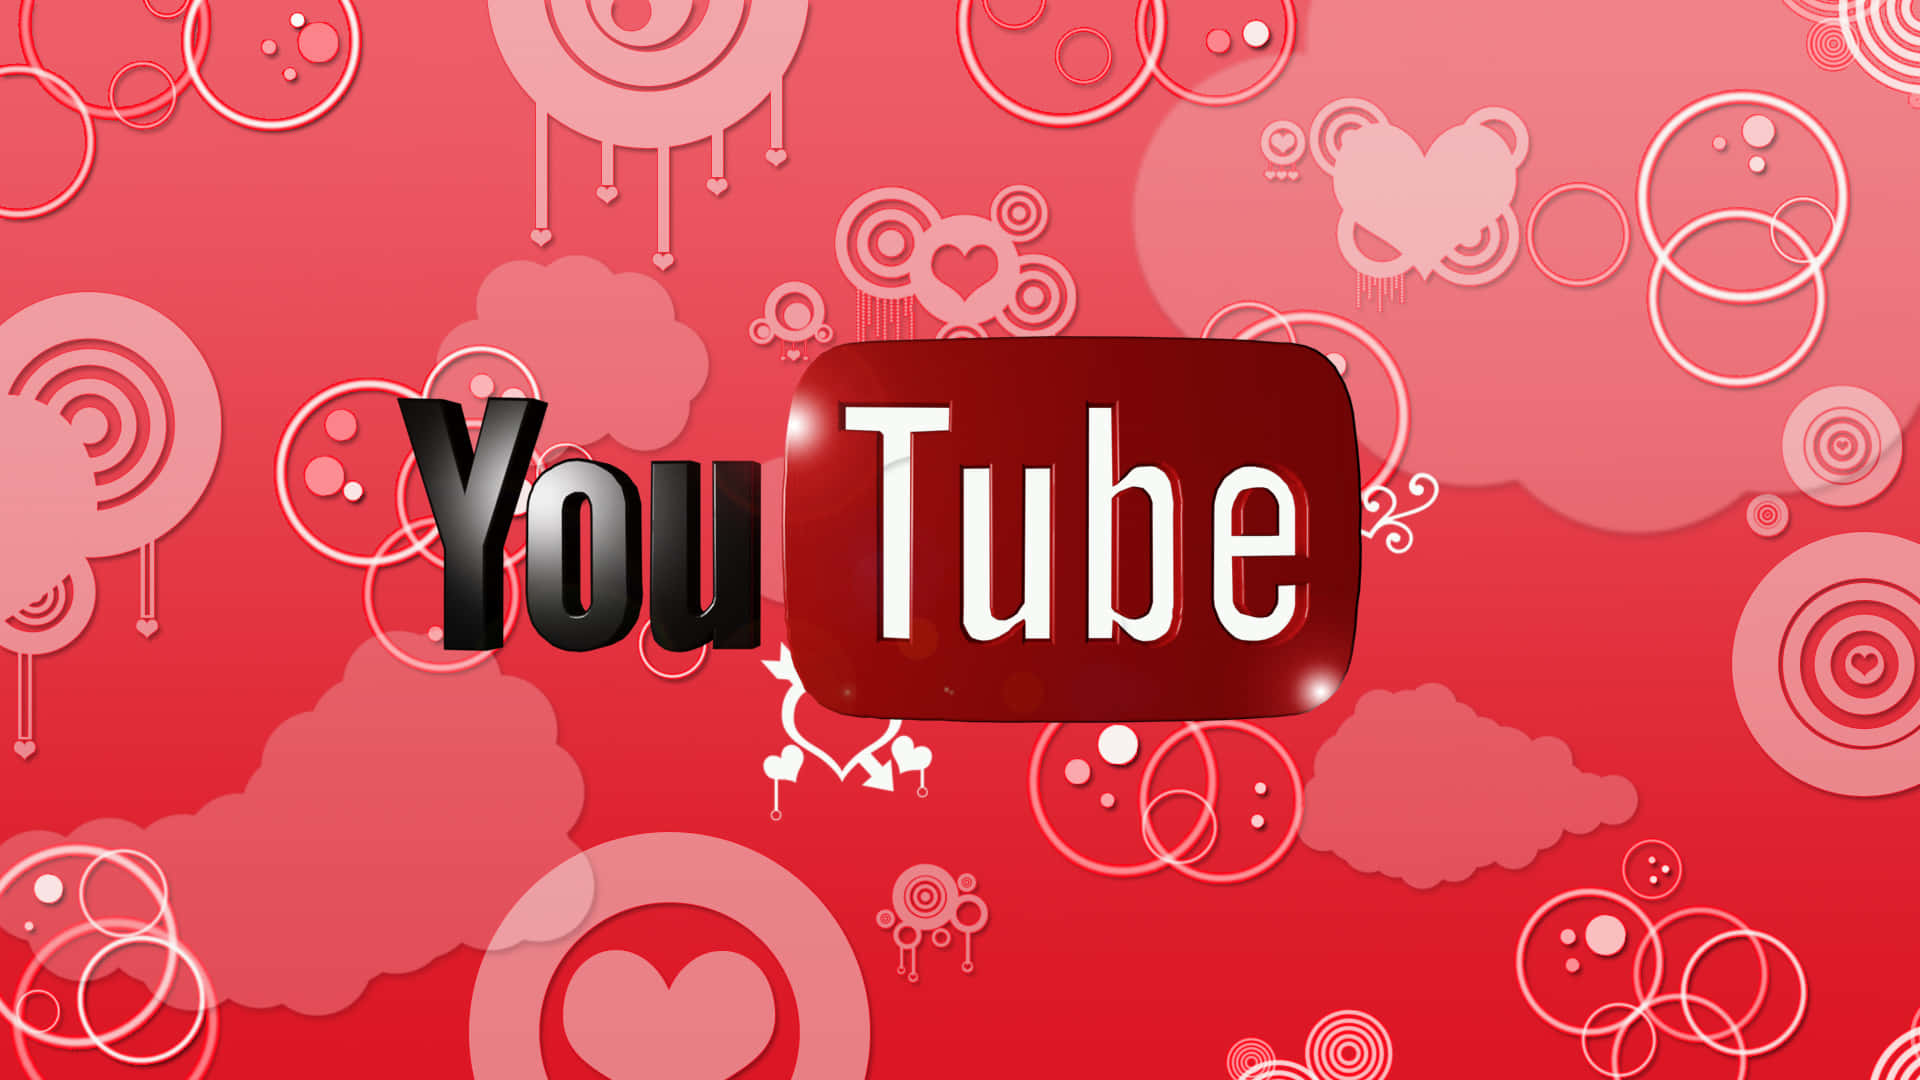 Download Youtube Logo 1920 X 1080 Background | Wallpapers.com